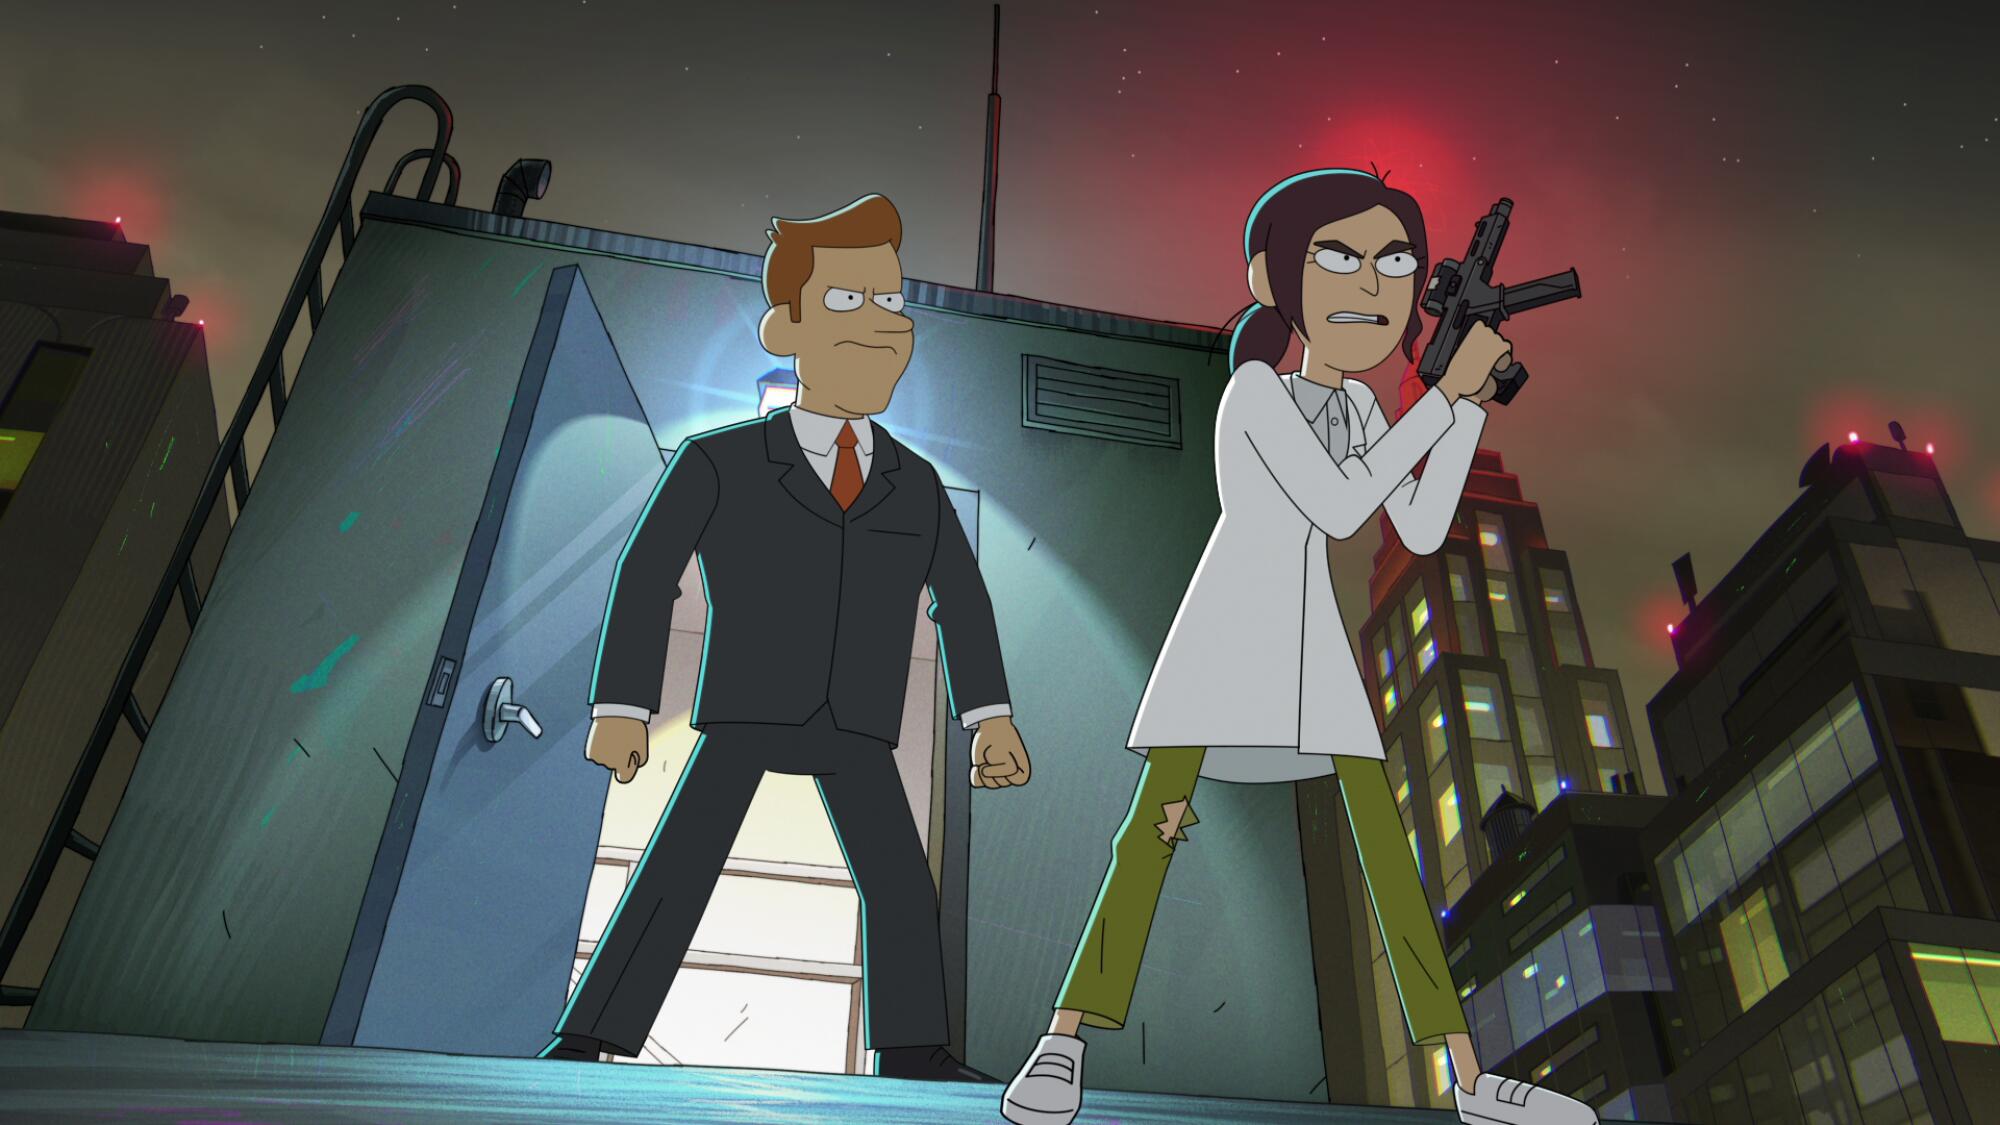 Animation of a man in a doorway behind a woman holding a gun